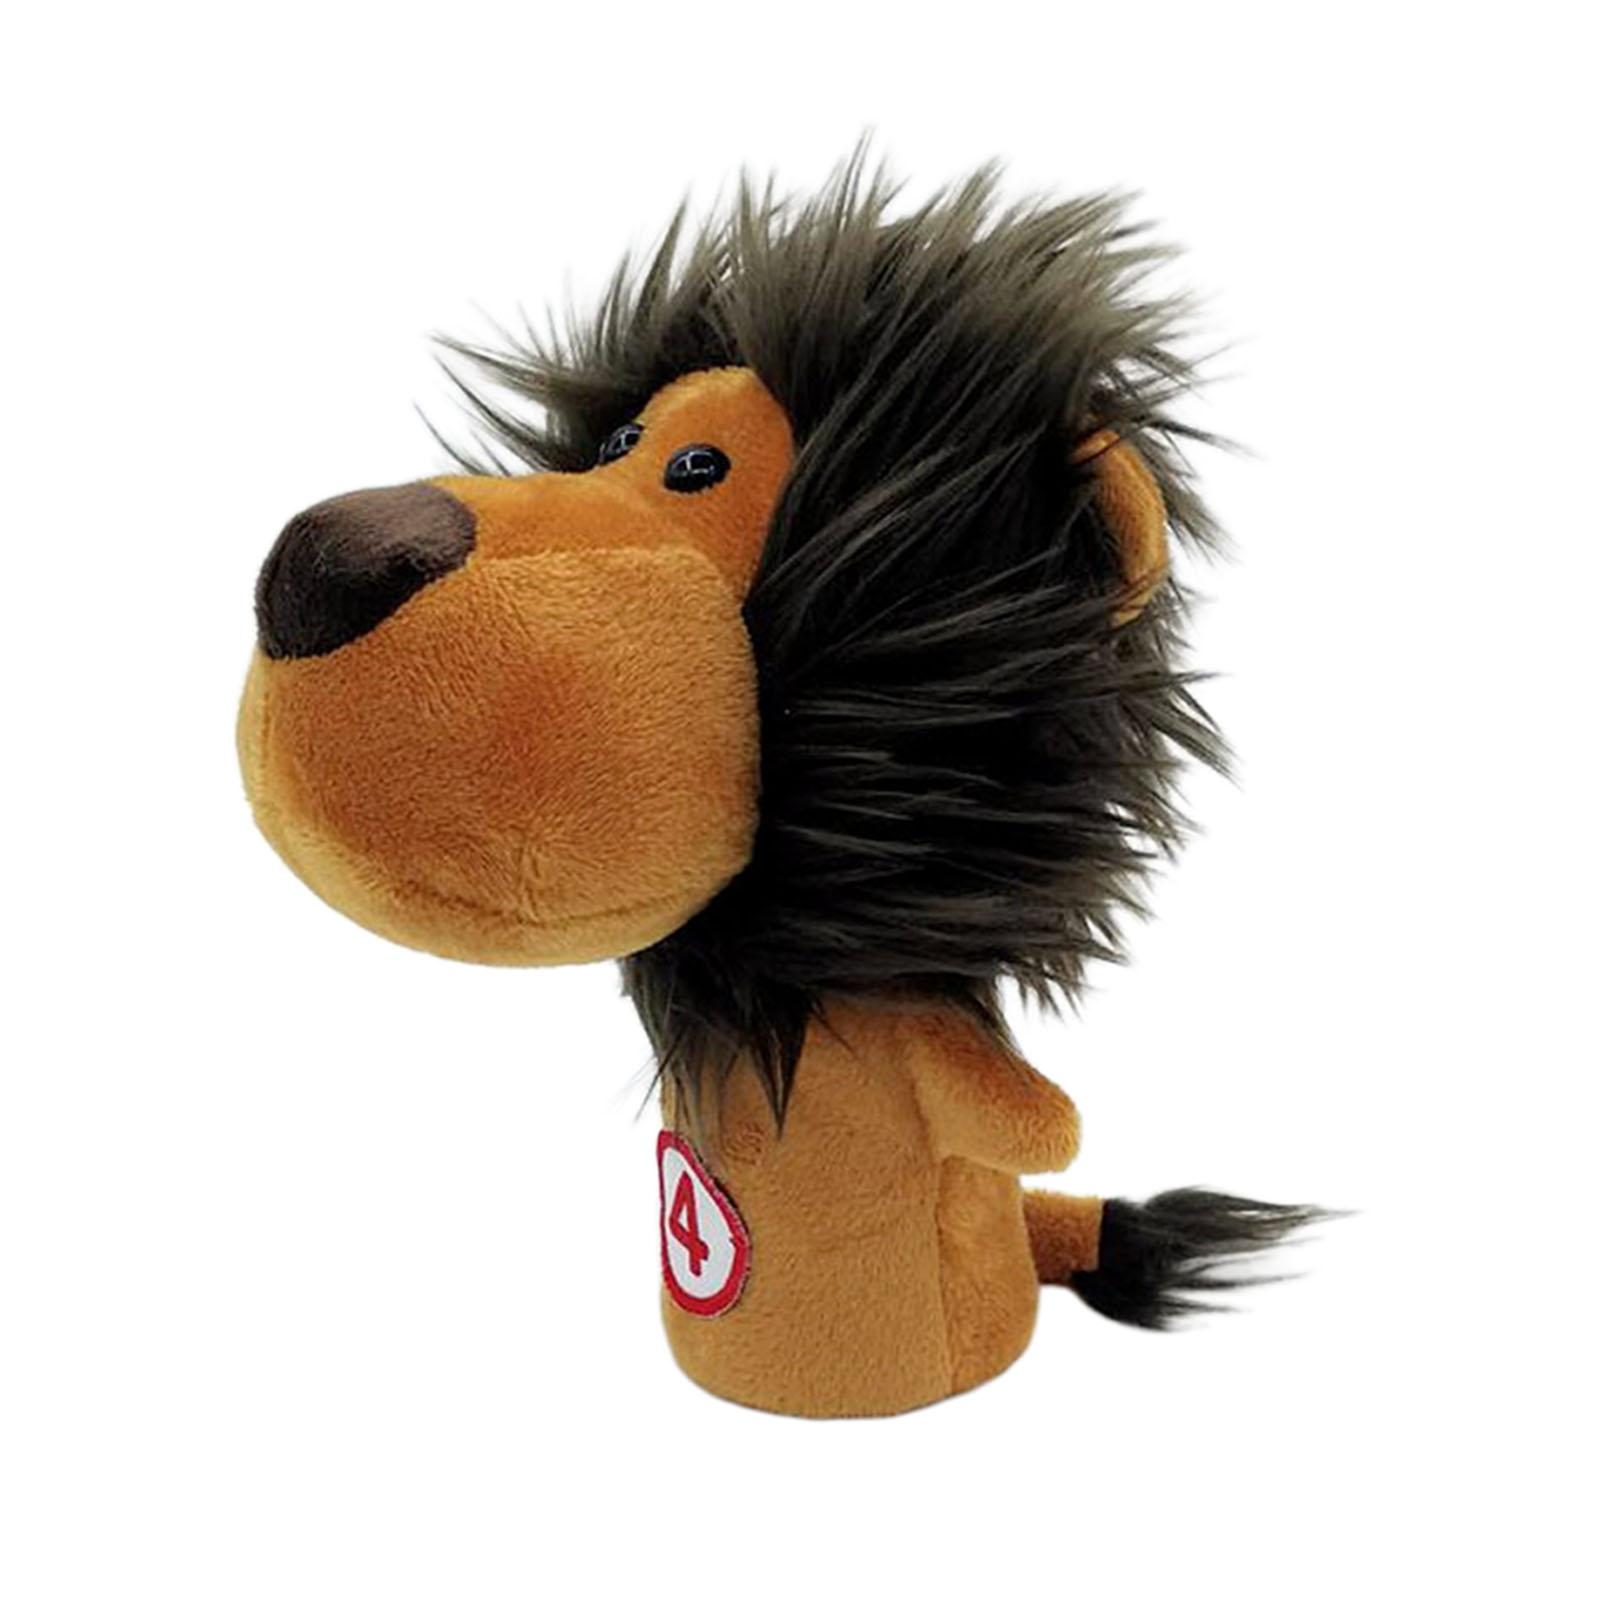 Novelty Plush Animal Golf Iron Headcover Wedges Club Head Cover Lion No.4